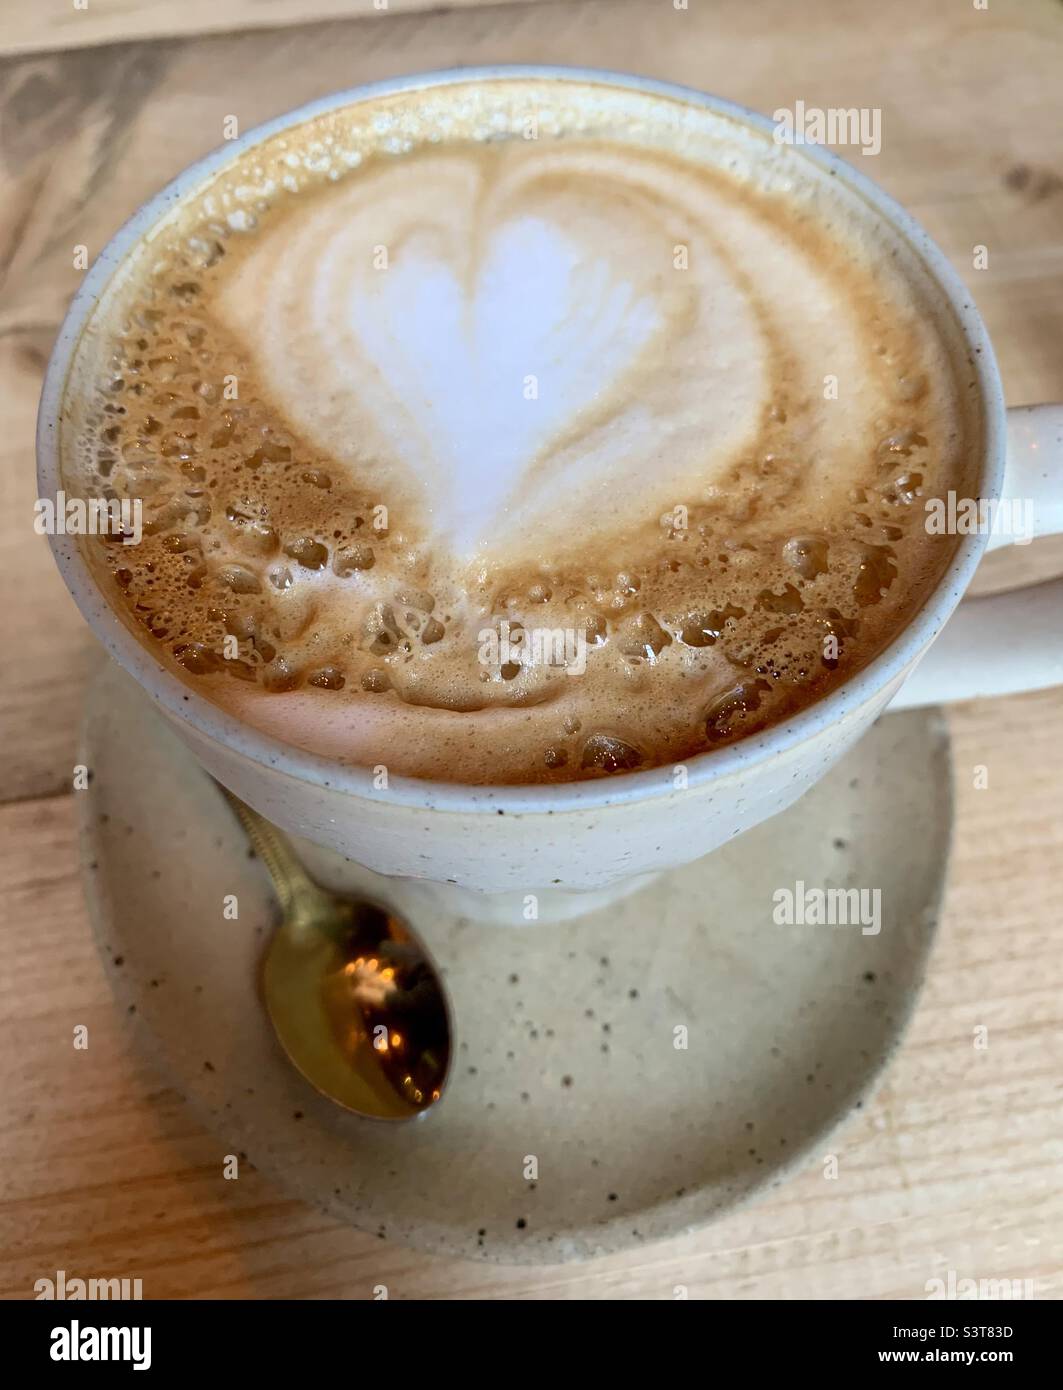 Frothy heart shaped coffee art on cup of coffee Stock Photo